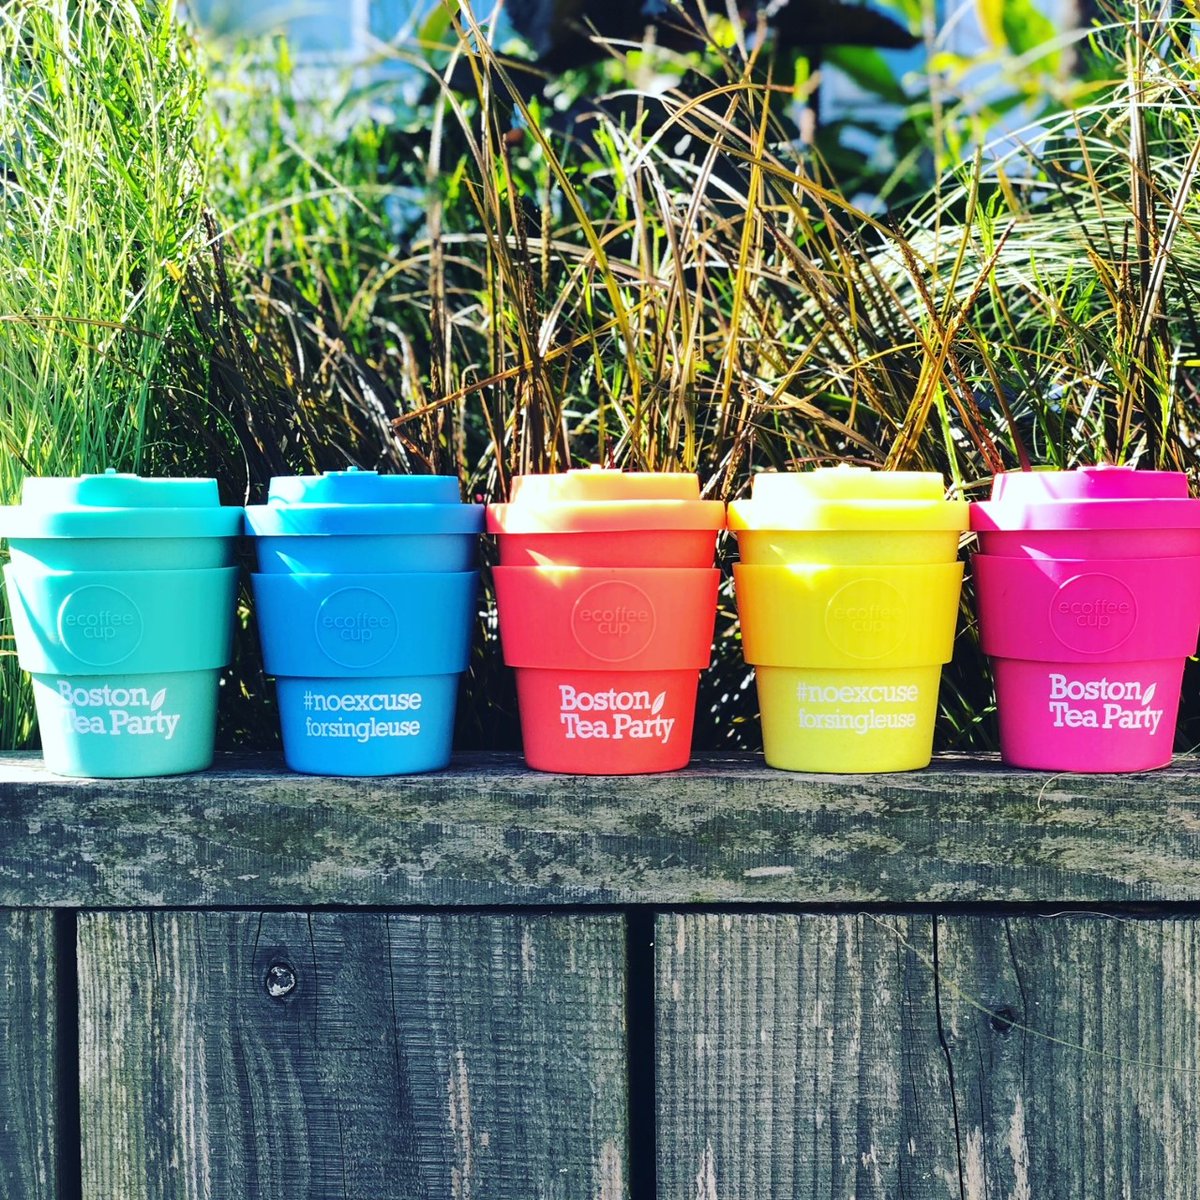 🌞Sustainability with a side of sunshine @ecoffee_cup . 🌻 #choosetoreuse this Summer - our reusable cups are the perfect partner in crime, from festival frolics to picnics in the park. . #noexcuseforsingleuse #ecoffeecup #reusablecup #noplanetb #btpcafes #makingthingsbetter